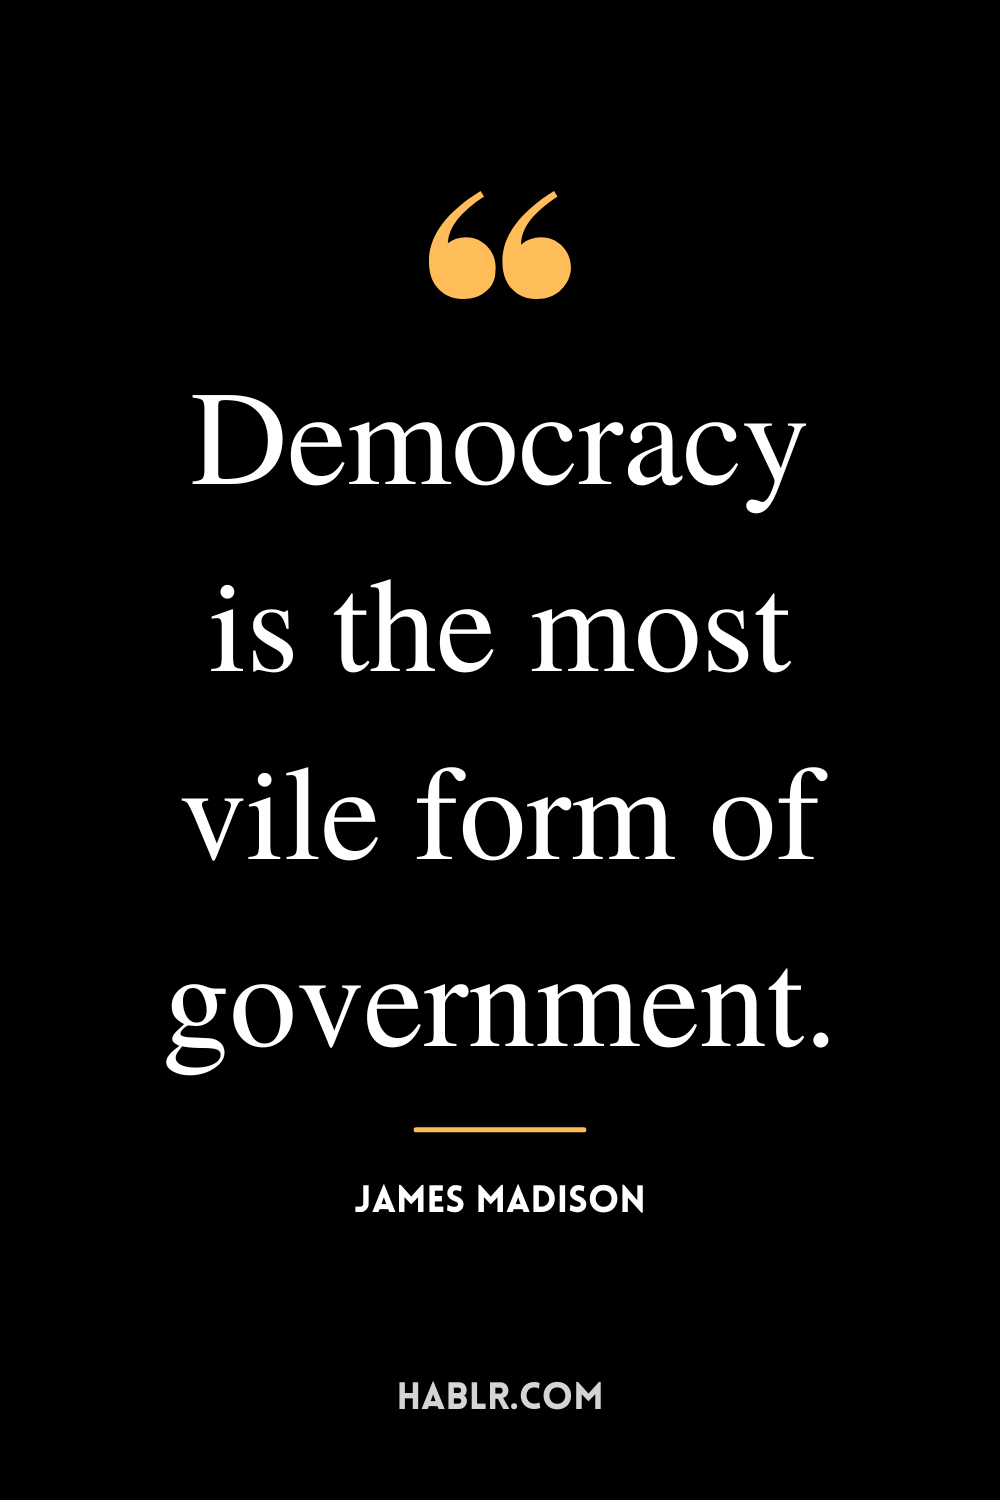 “Democracy is the most vile form of government.” -James Madison